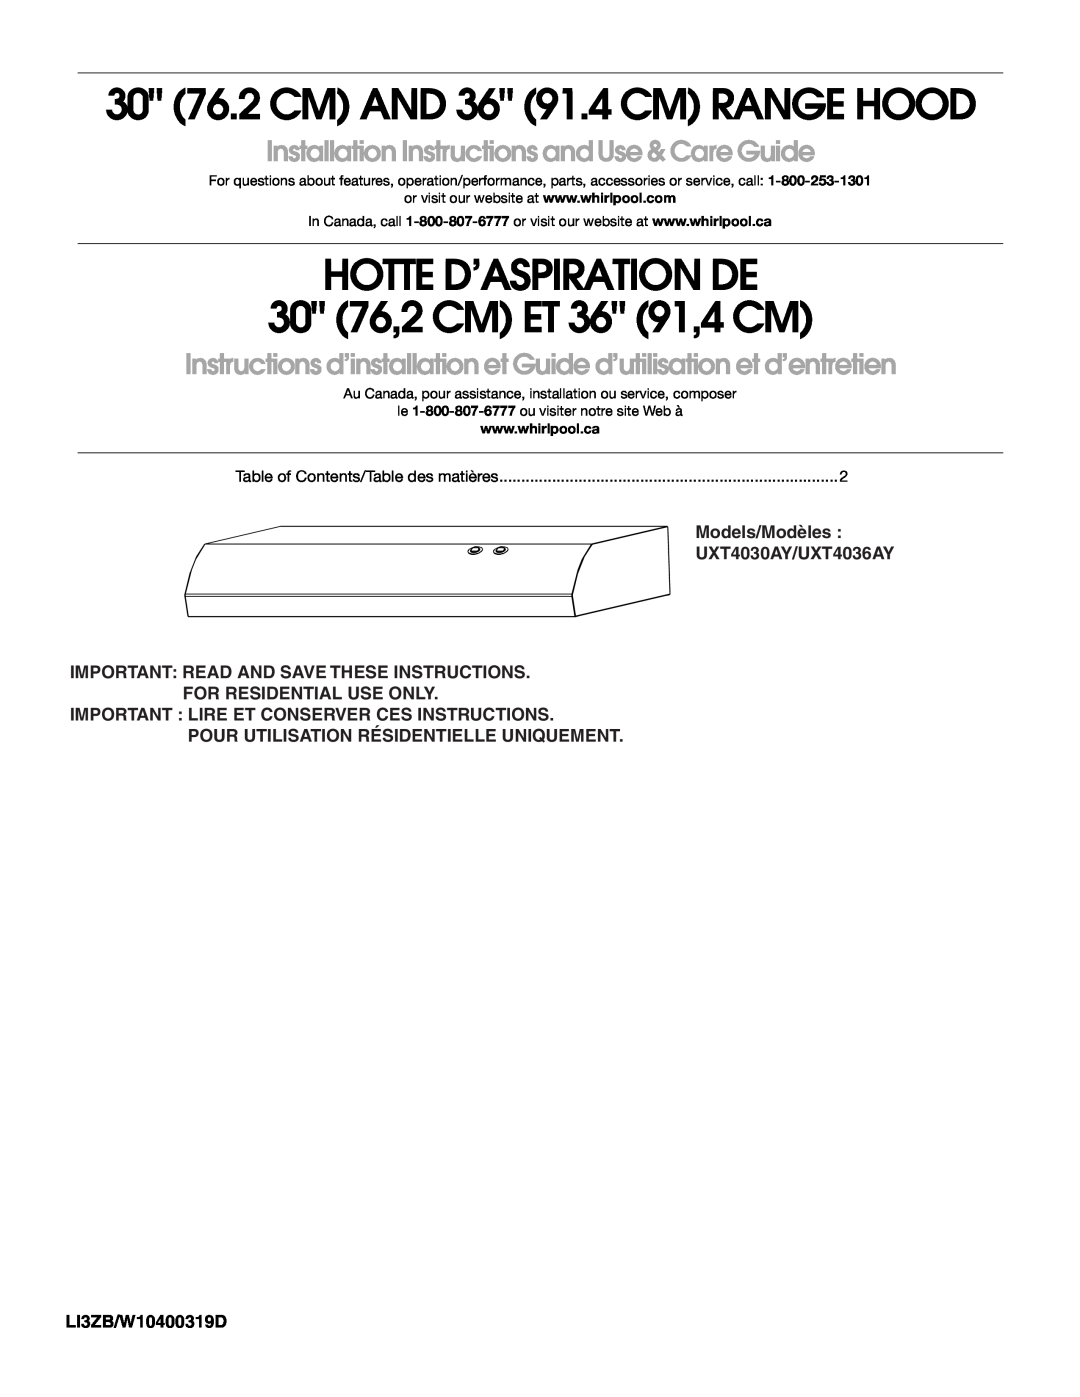 Whirlpool installation instructions Models/Modèles UXT4030AY/UXT4036AY, Important Read And Save These Instructions 